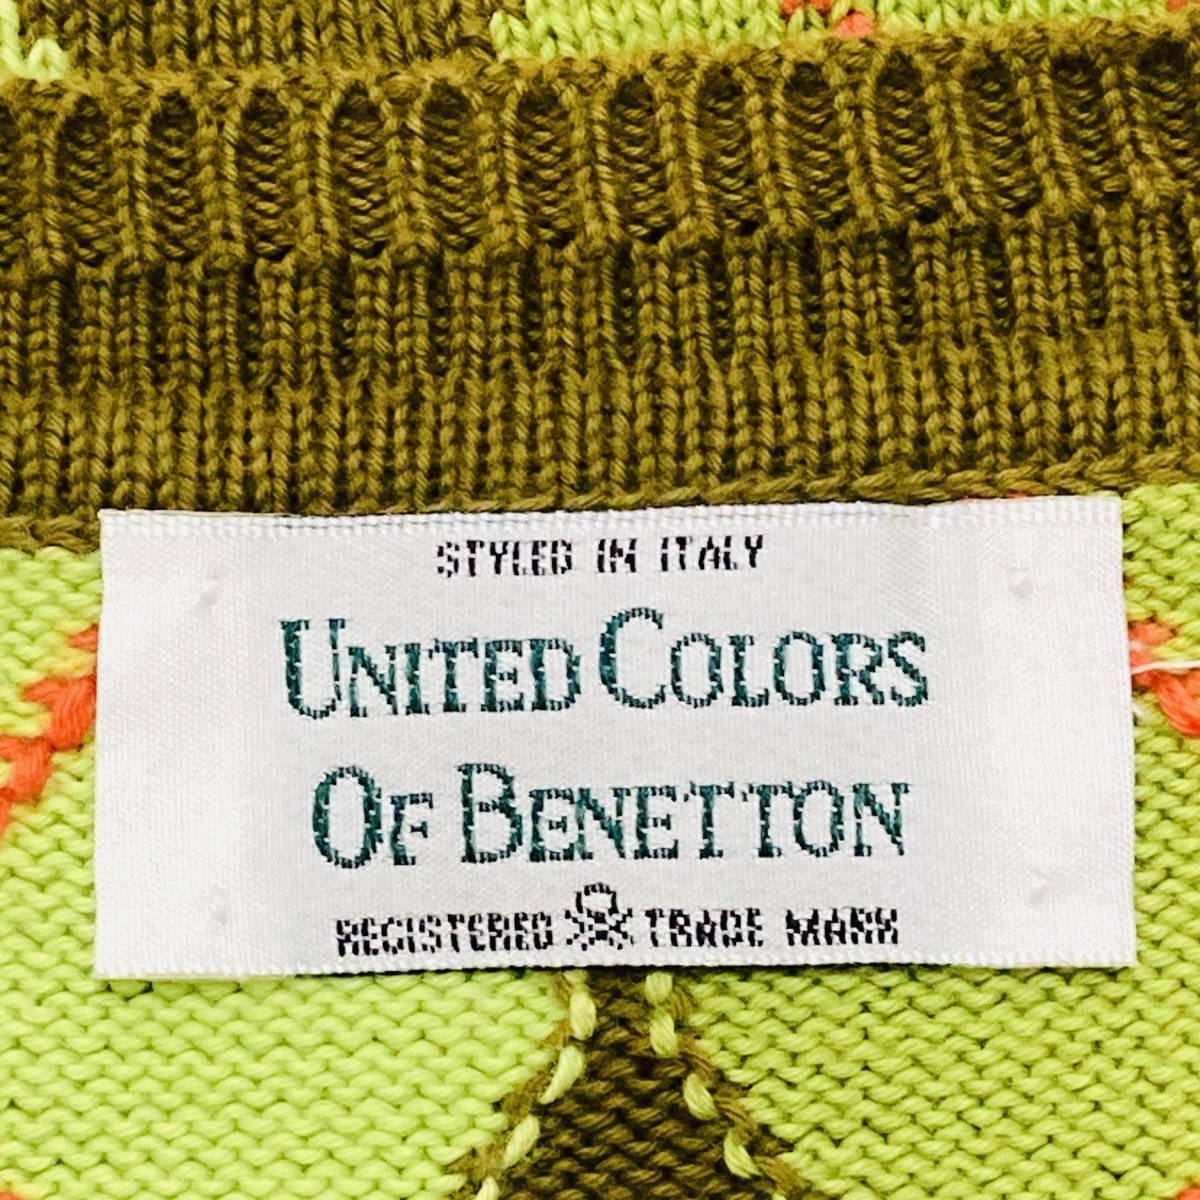 a01604 beautiful goods UNITED COLORS OF BENETTON Benetton long sleeve knitted sweater ound-necked a-ga il green cotton 100% on goods fine quality femi person floral style 